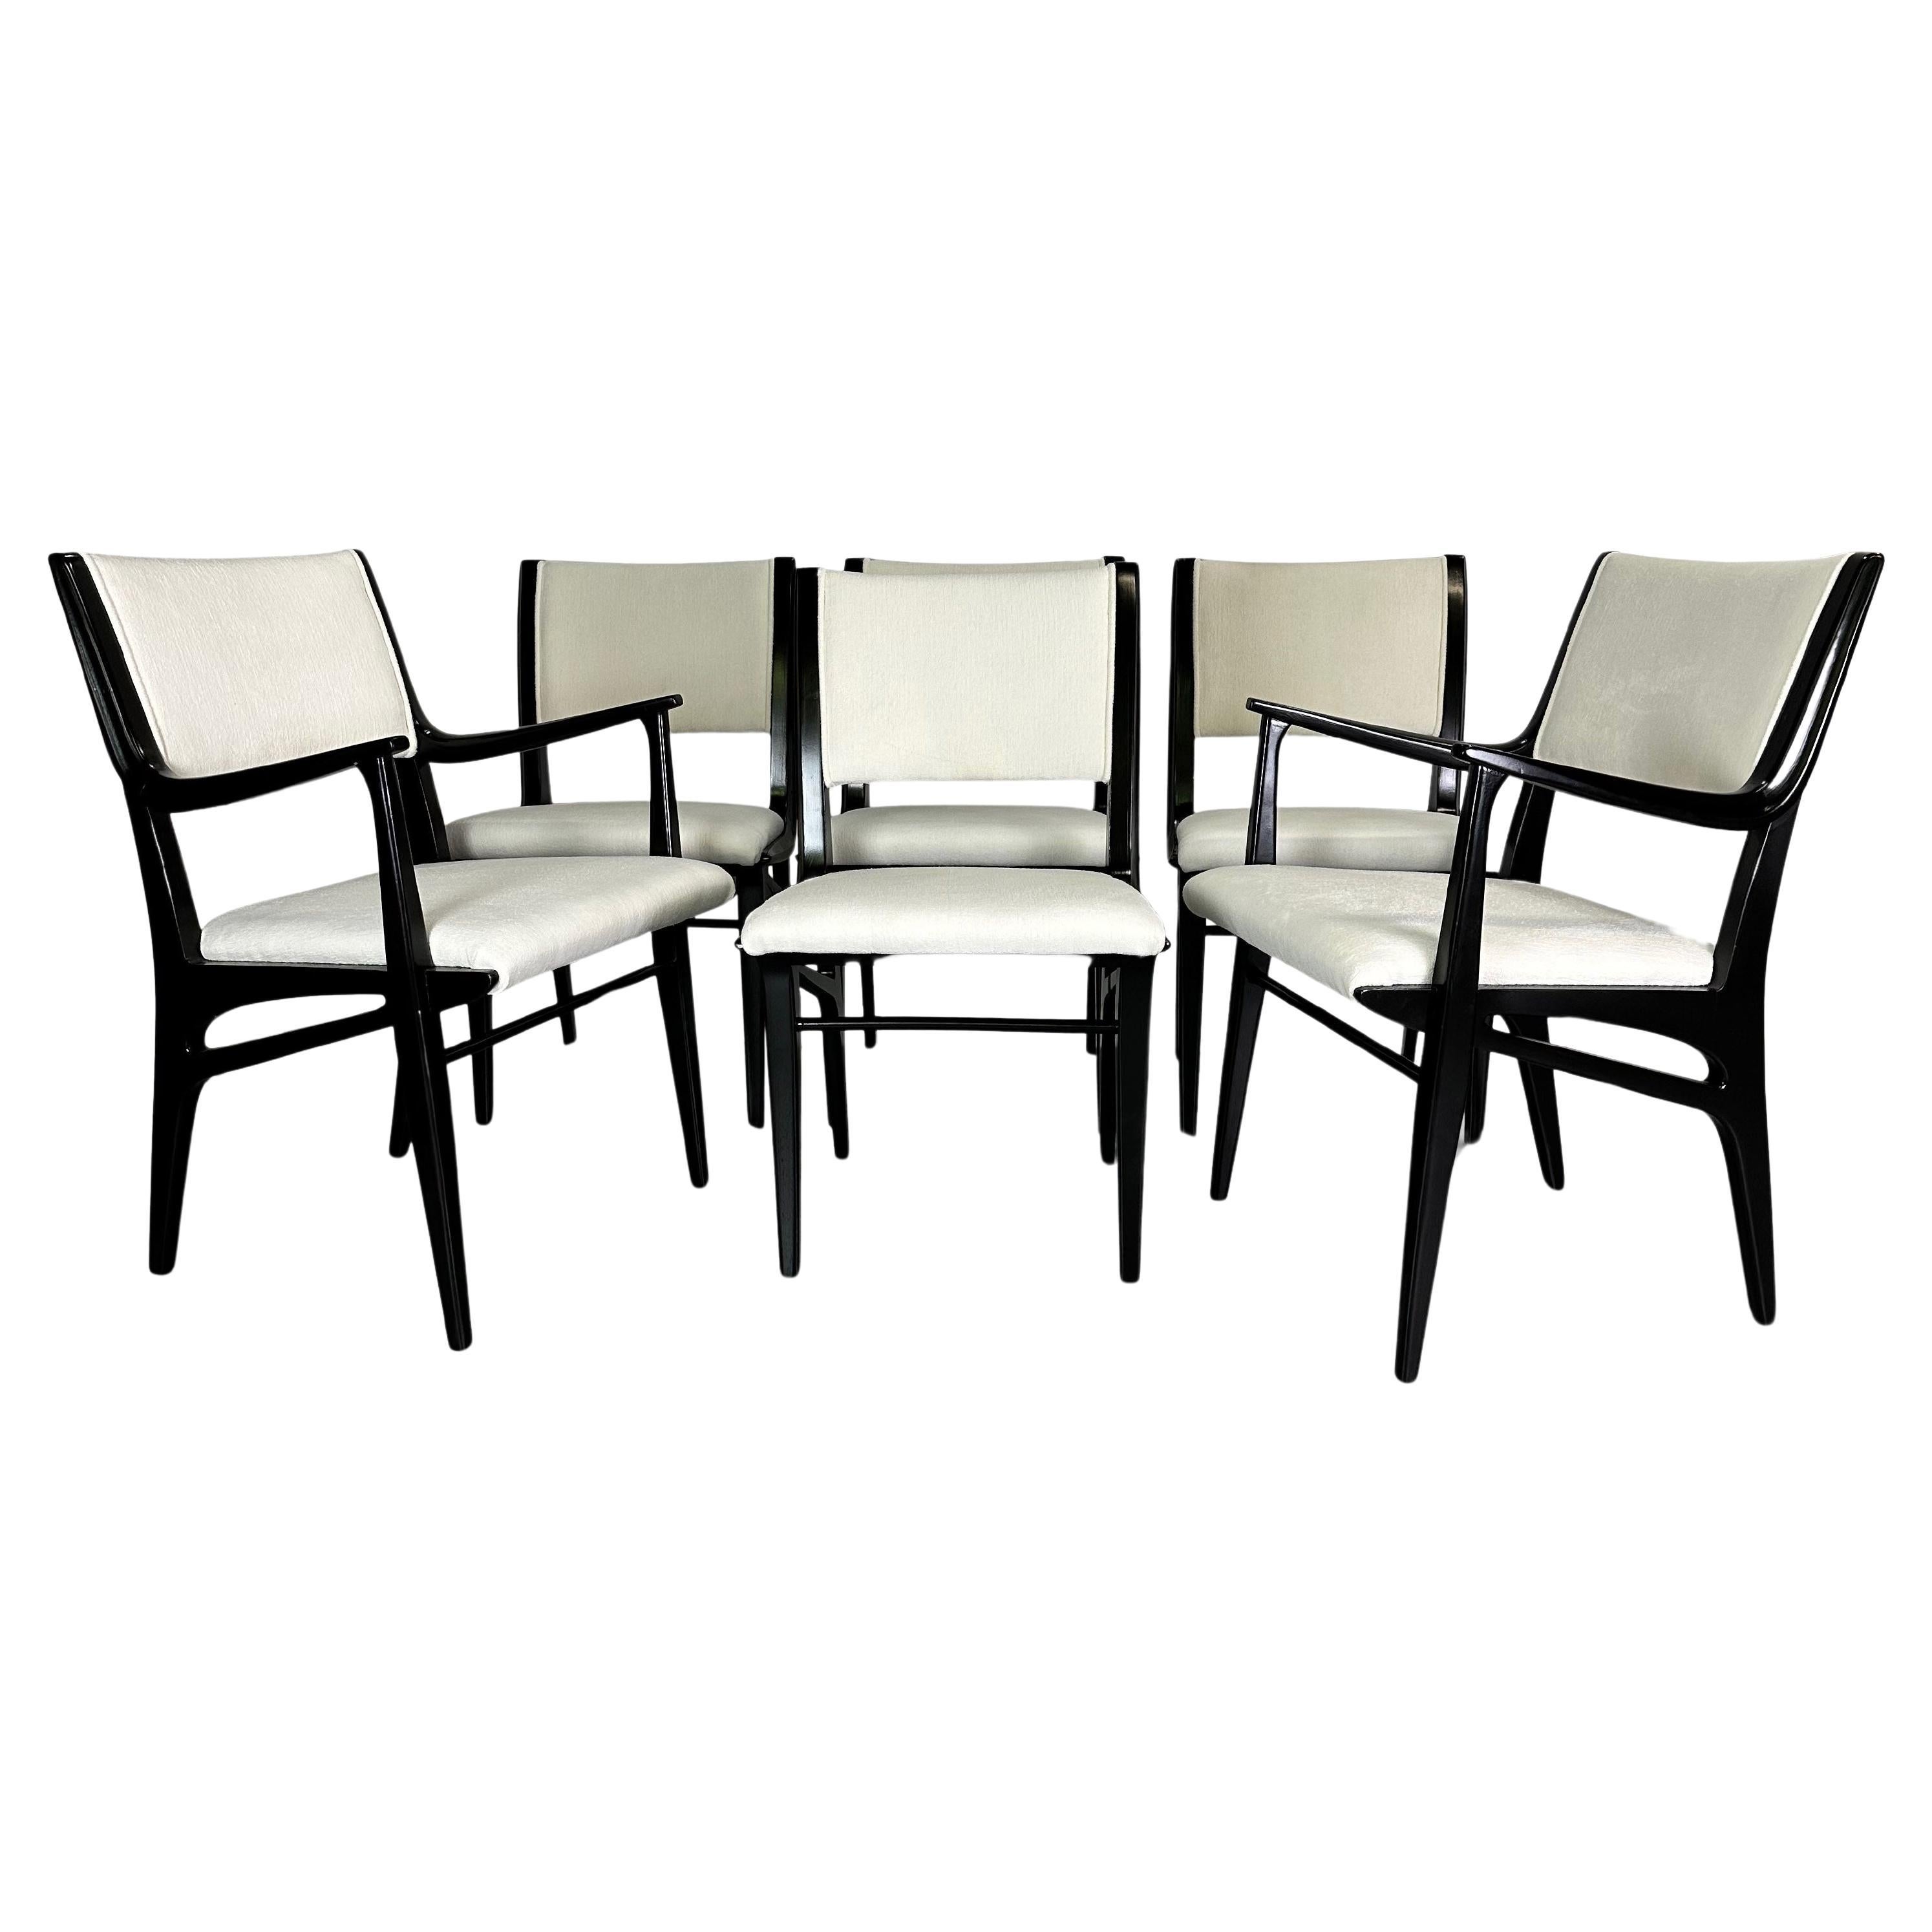 Wonderful set of six John Van Koert dining chairs, these incredibly designed chairs have a modernist style that is so sophisticated that they will enhance any dining room. These chairs have been lacquered black and upholstered in a textured white